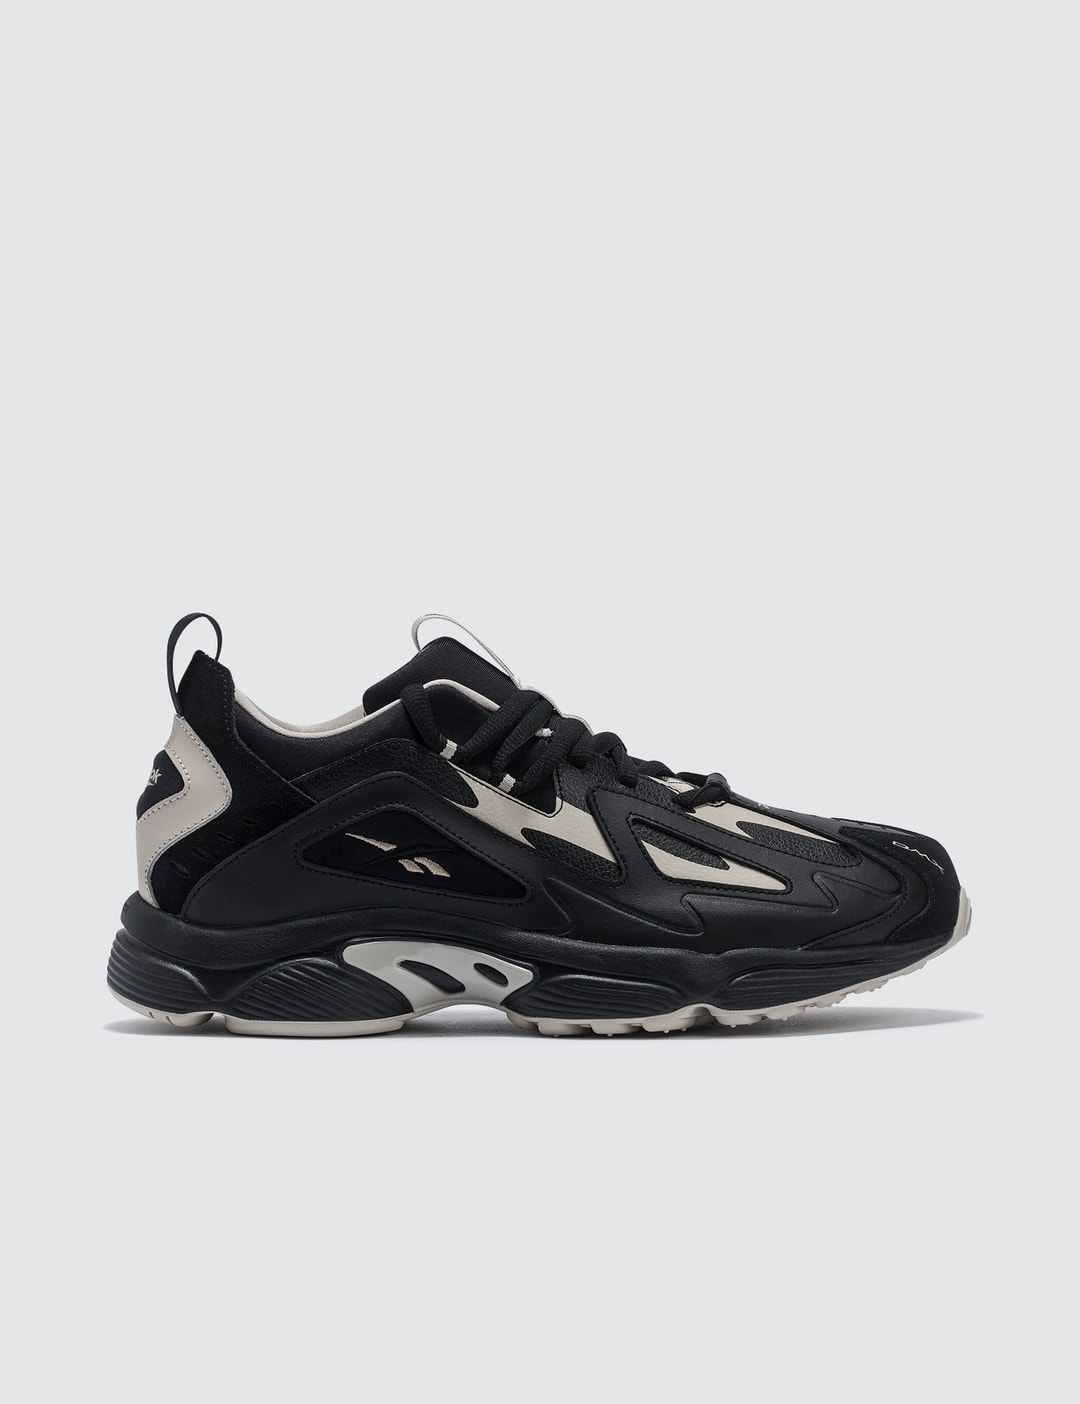 Invertir Elocuente Disciplina Reebok - Wanna One x Reebok DMX Series 1200 "Park Woojin" | HBX - Globally  Curated Fashion and Lifestyle by Hypebeast